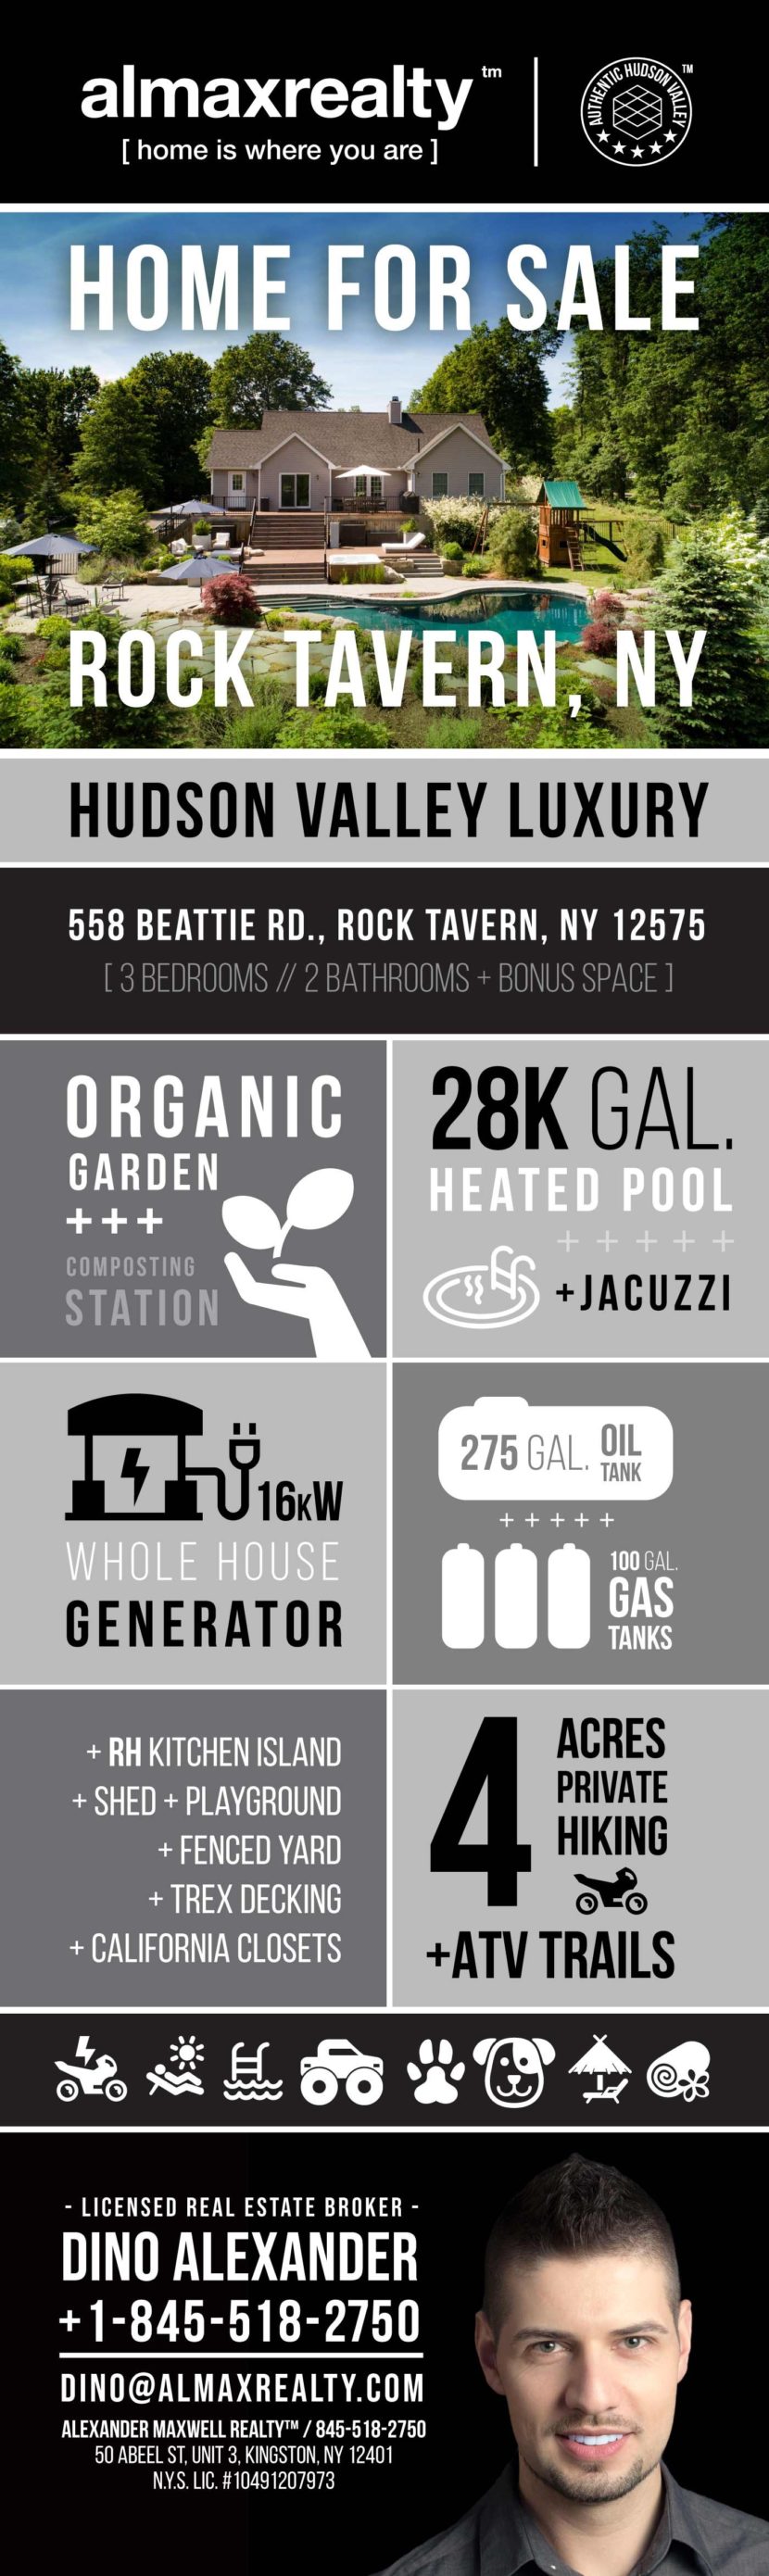 Alexander Maxwell Realty Infographic: Luxury Hudson Valley Home for Sale in Rock Tavern, NY